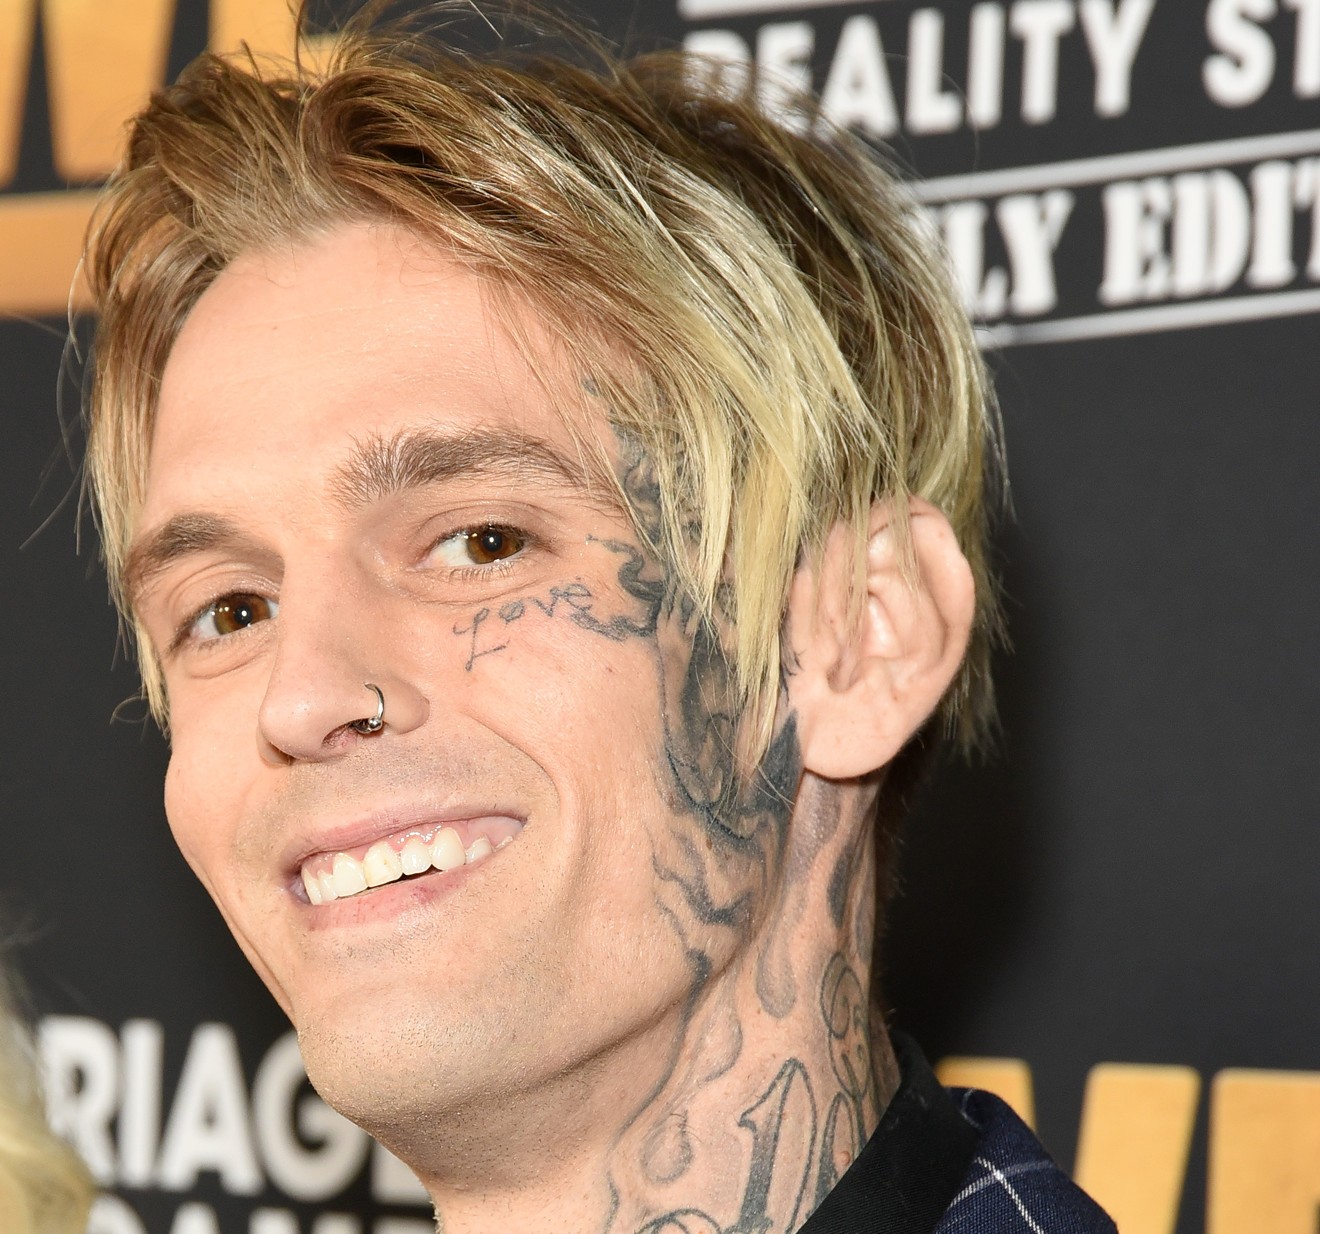 Aaron Carter, 34, was found dead at his home in California home over the weekend. The former teen idol had suffered from mental health problems and addiction.